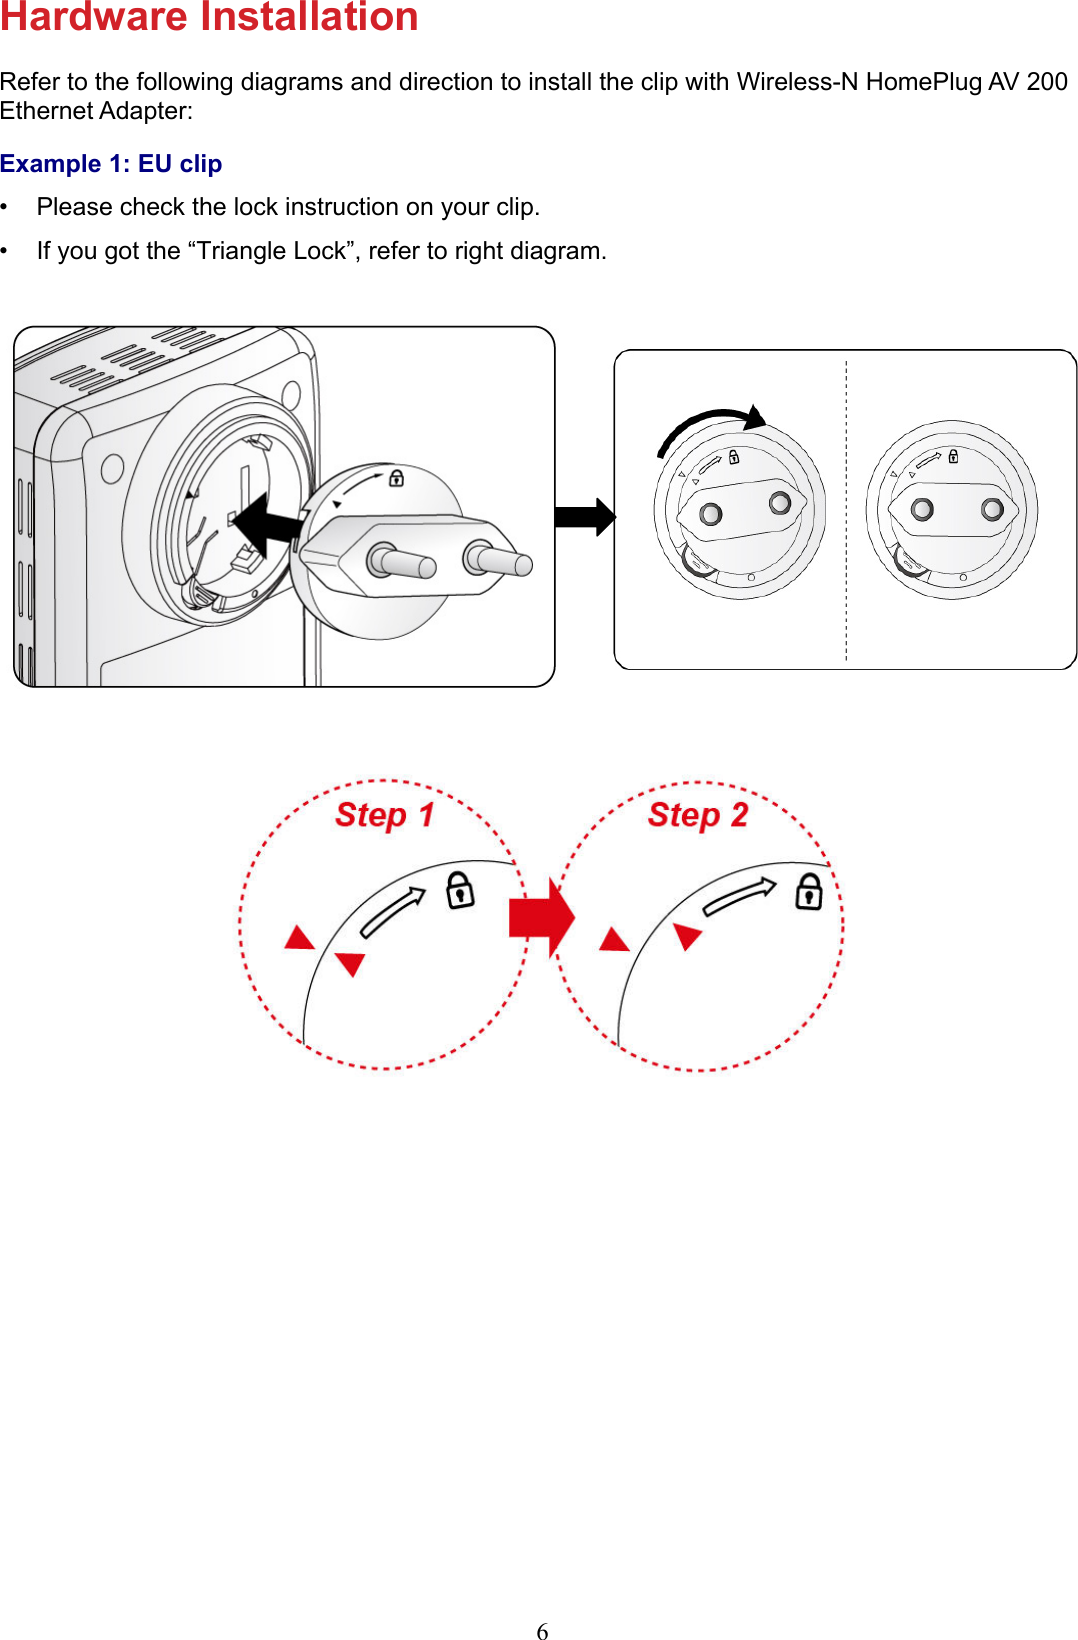 6Hardware InstallationRefer to the following diagrams and direction to install the clip with Wireless-N HomePlug AV 200 Ethernet Adapter:Example 1: EU clipPlease check the lock instruction on your clip.• If you got the “Triangle Lock”, refer to right diagram.•  